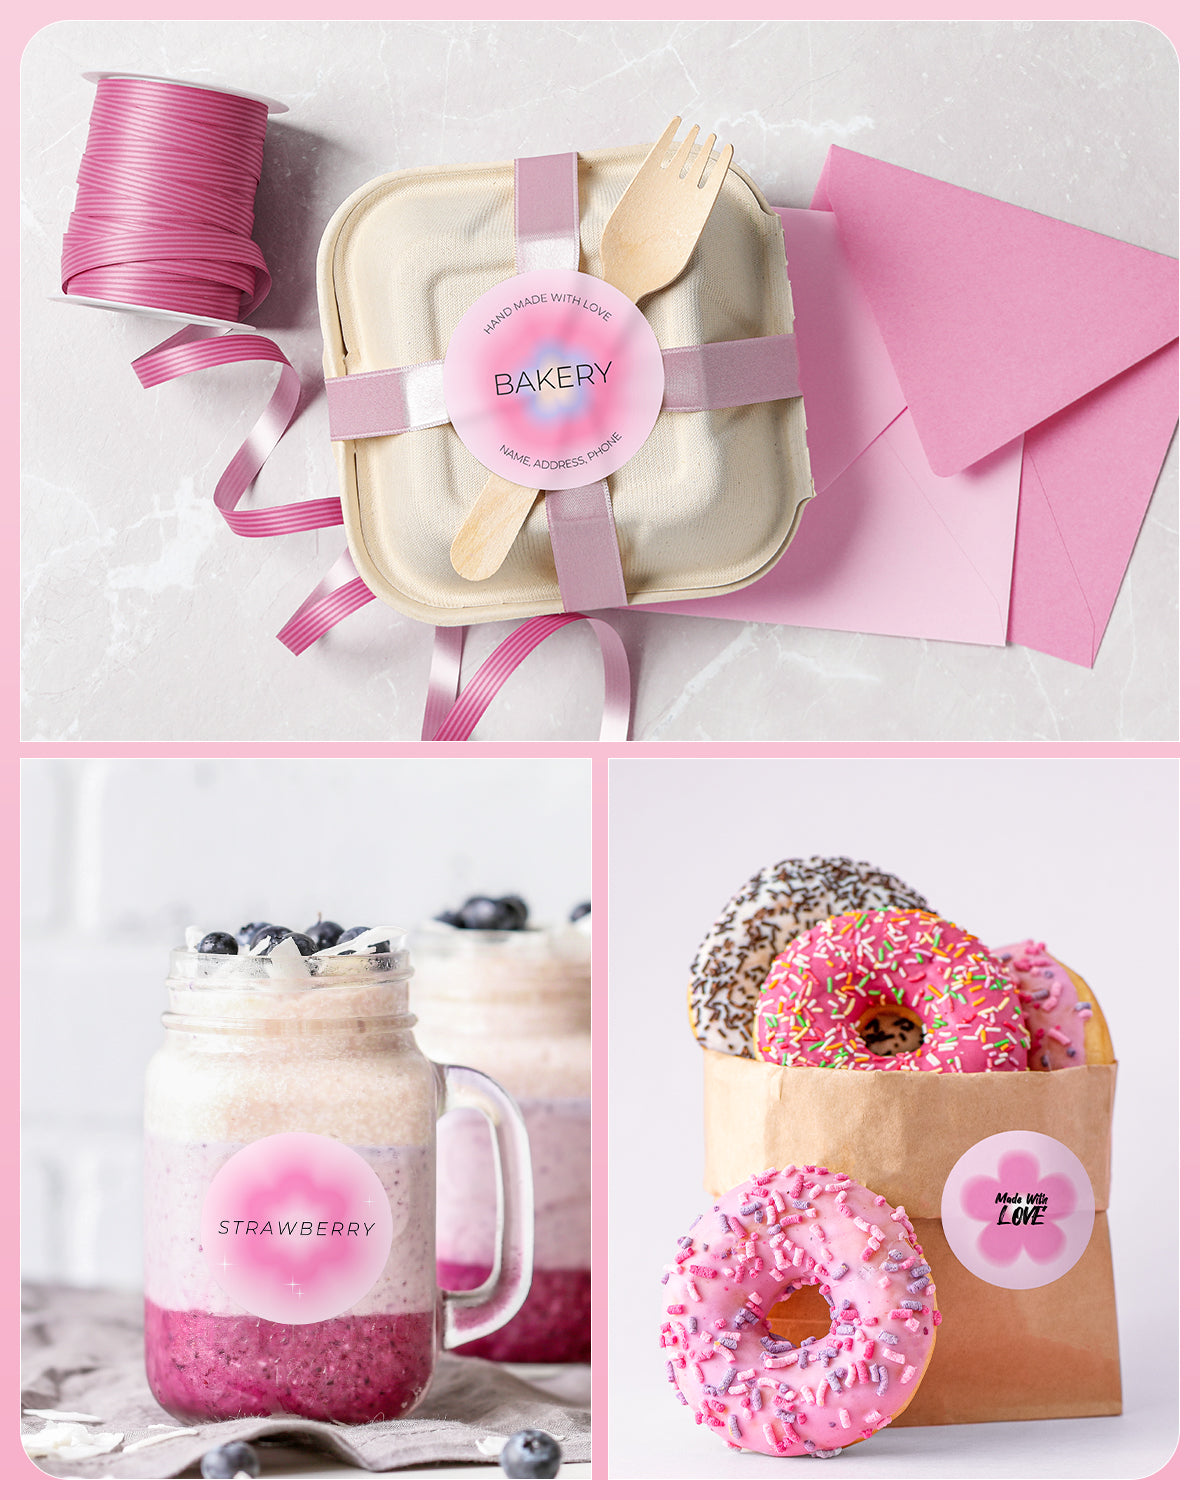  Perfect for personalizing mason jars, branding artisanal foods, or giving merchandise a unique touch, these Pink Multi-Pattern Thermal Label Rolls are ideal.